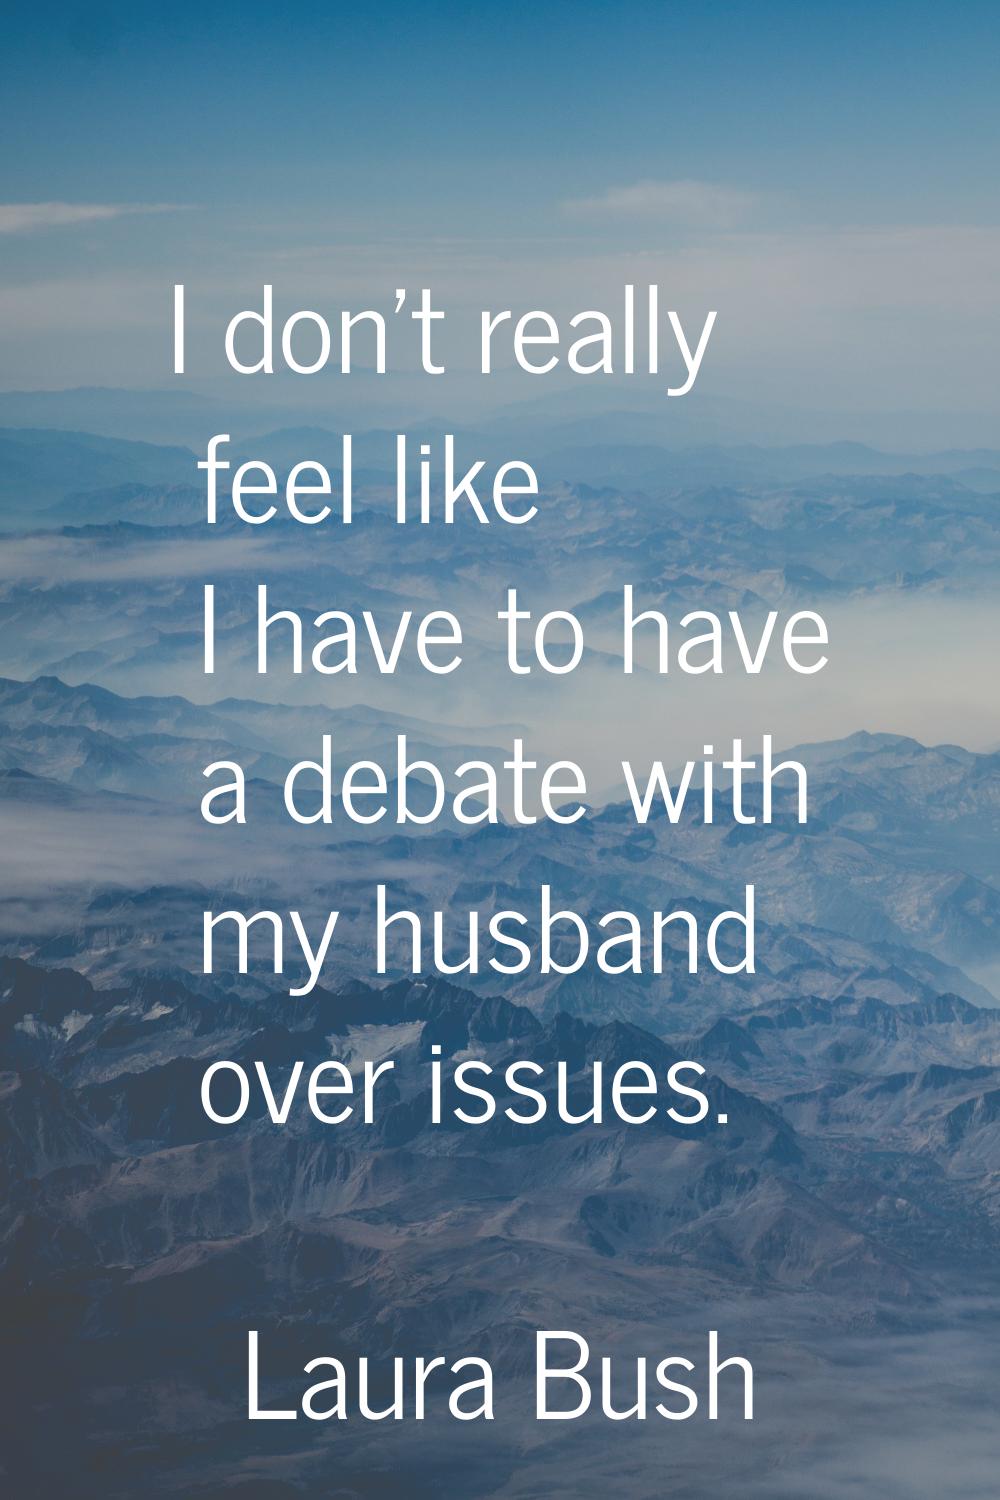 I don't really feel like I have to have a debate with my husband over issues.